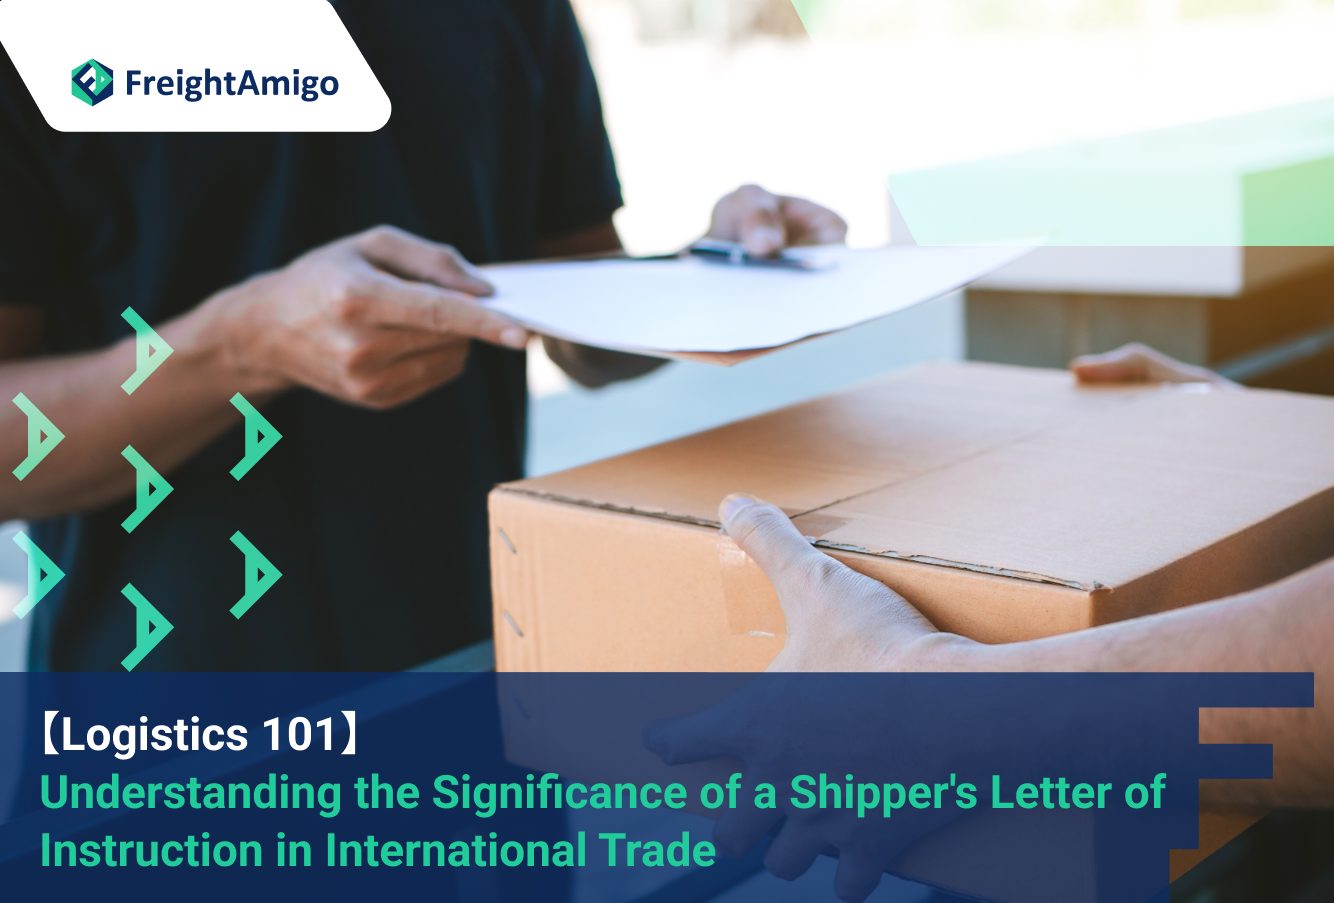 【Logistics 101】 Understanding the Significance of a Shipper's Letter of Instruction in International Trade